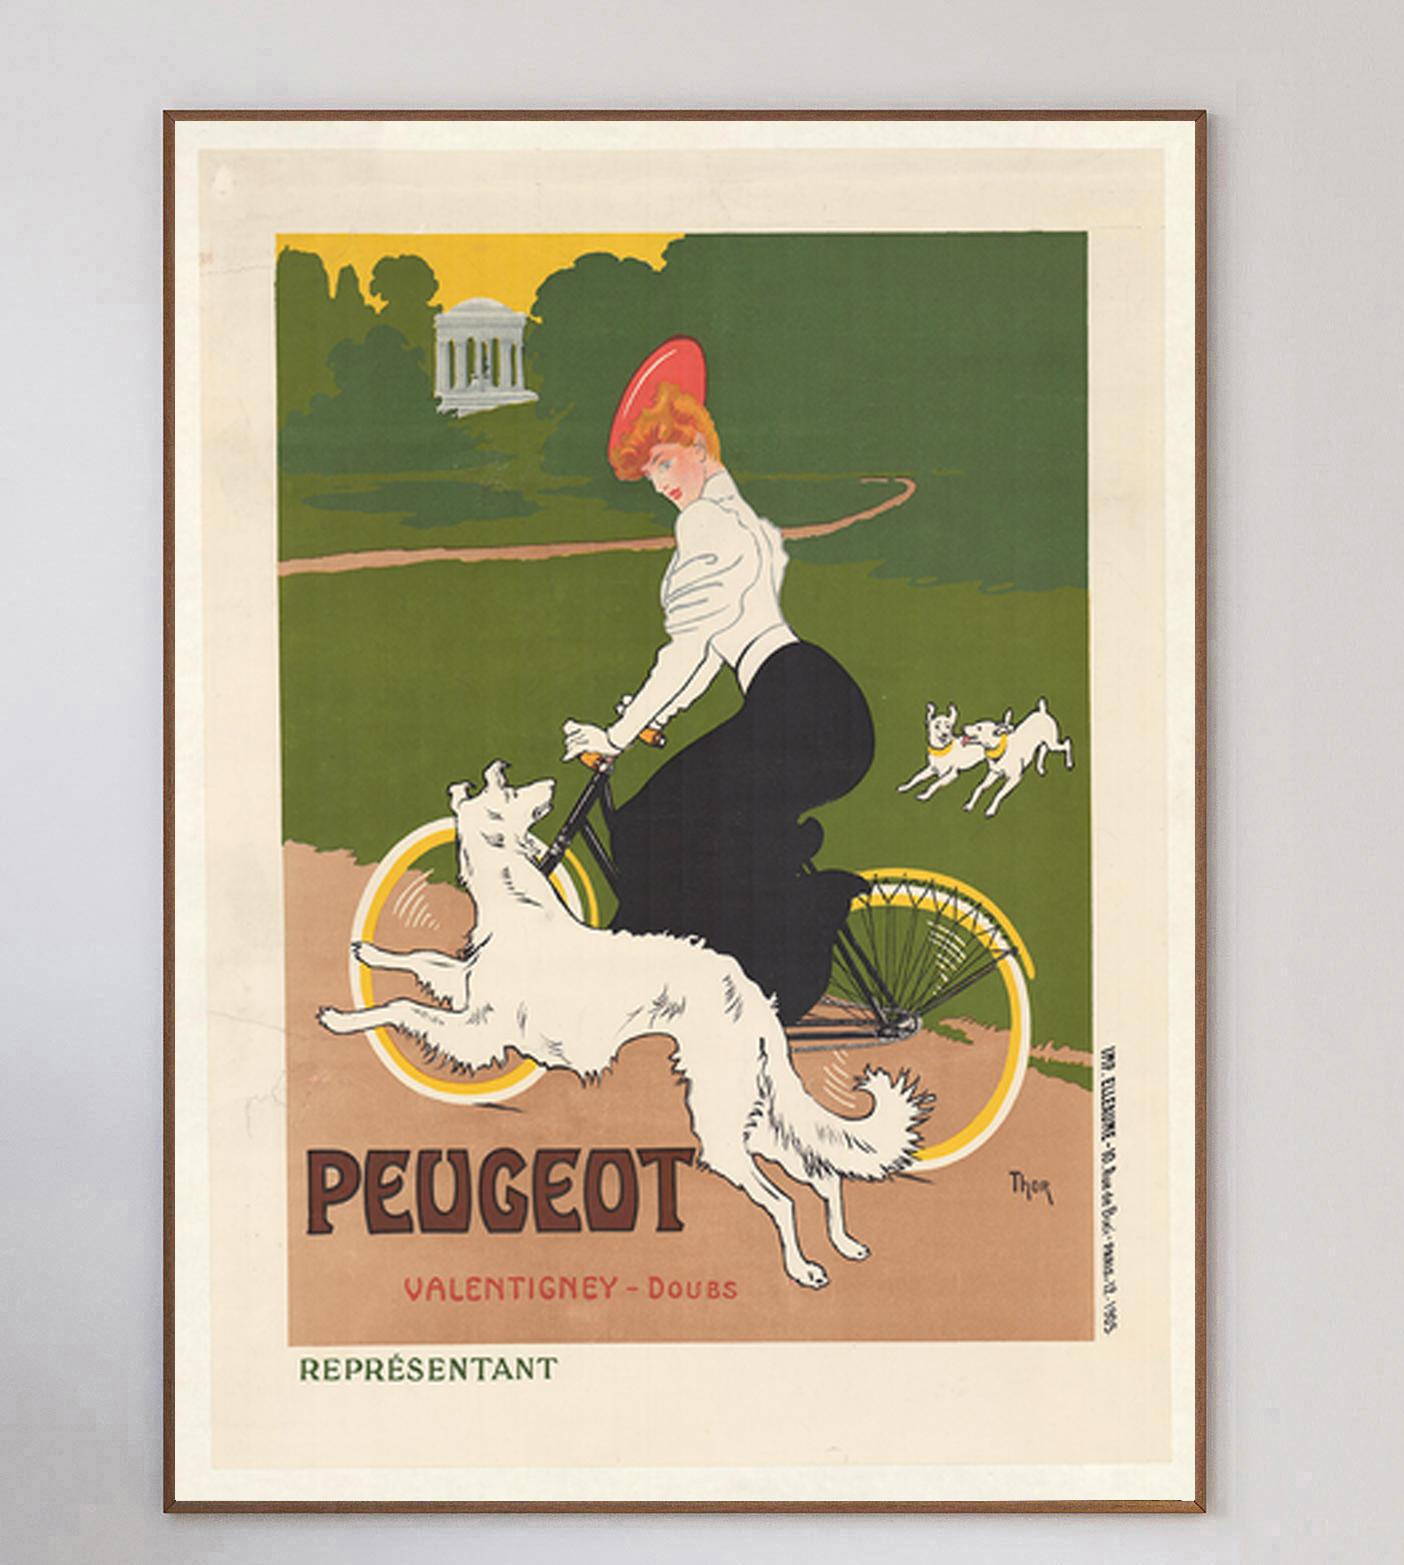 This beautiful poster was created in 1905, with artwork from German painter and illustrator Walter Thor. Promoting Peugeot Cycles in the Valentigney commune in Doubs, France, the artwork shows a woman cycling alongside her dogs ina wonderful